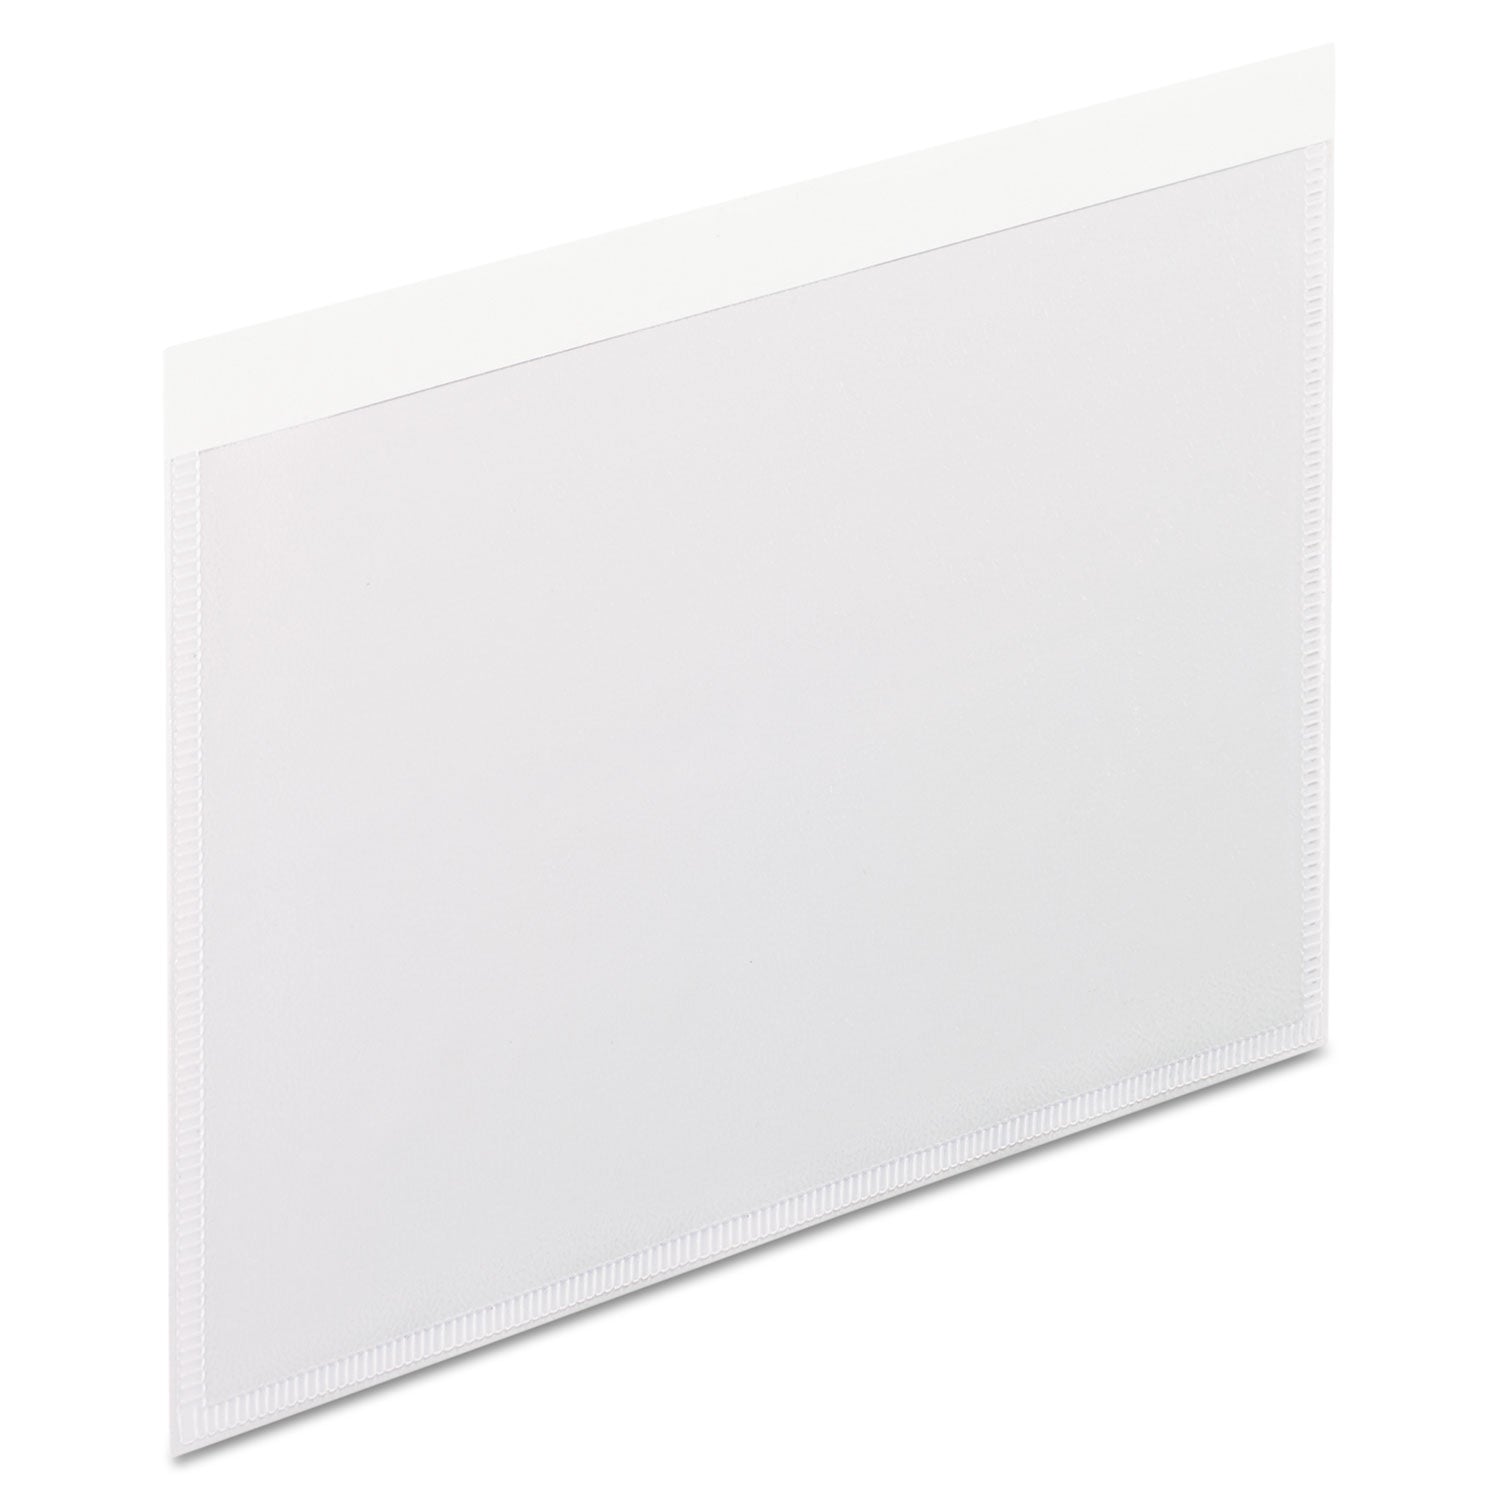 Self-Adhesive Pockets, 4 x 6, Clear Front/White Backing, 100/Box - 